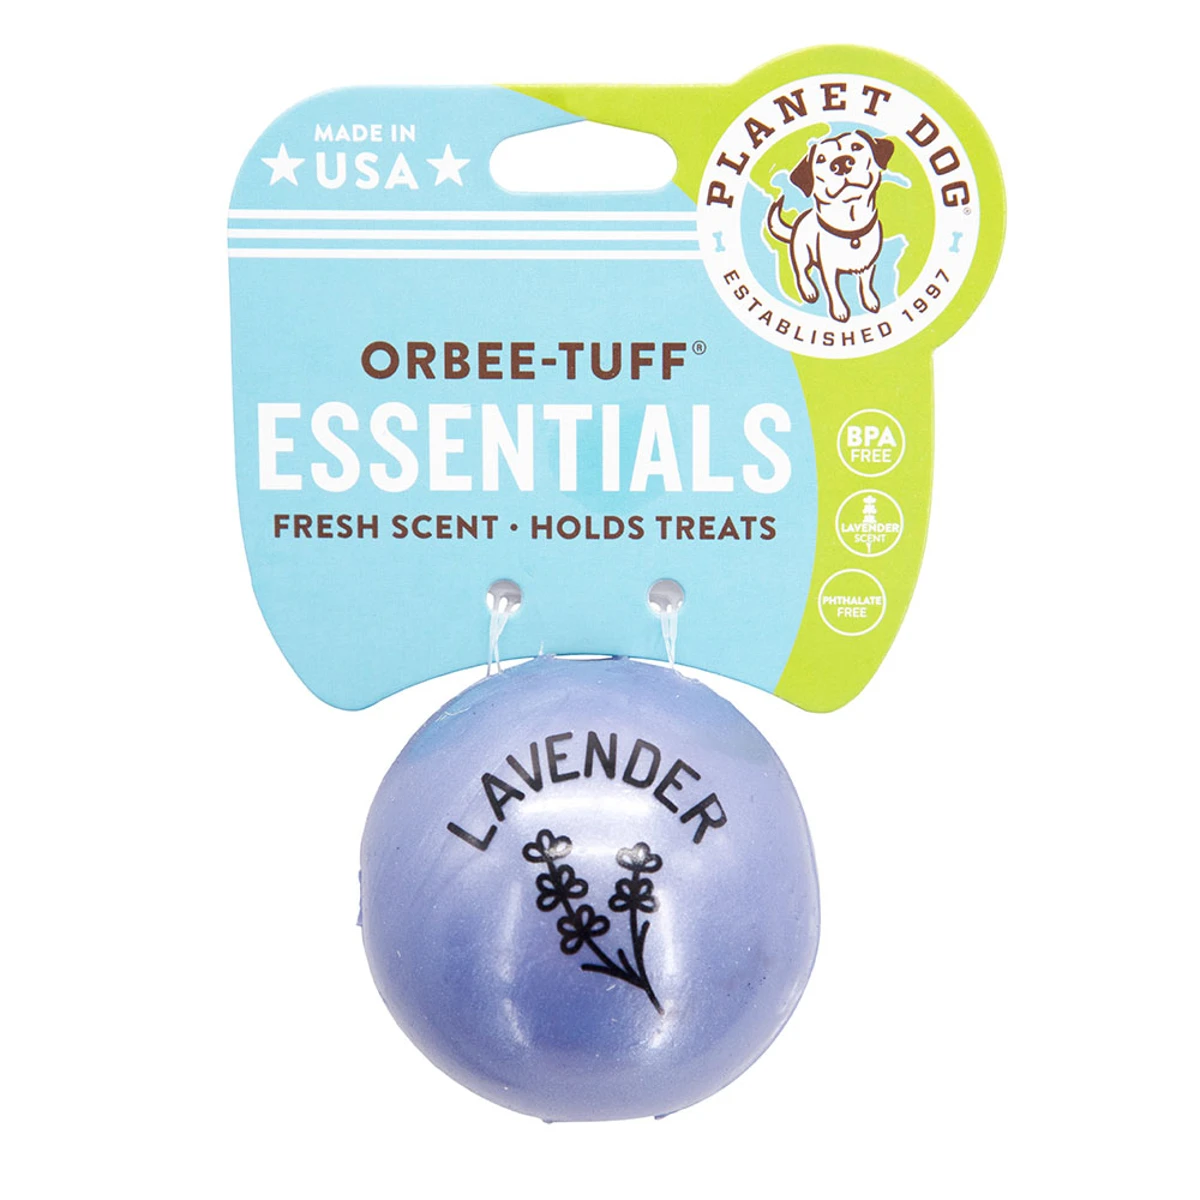 Planet Dog Orbee-Tuff Essentials Scented Ball Dog Toy - Lavender